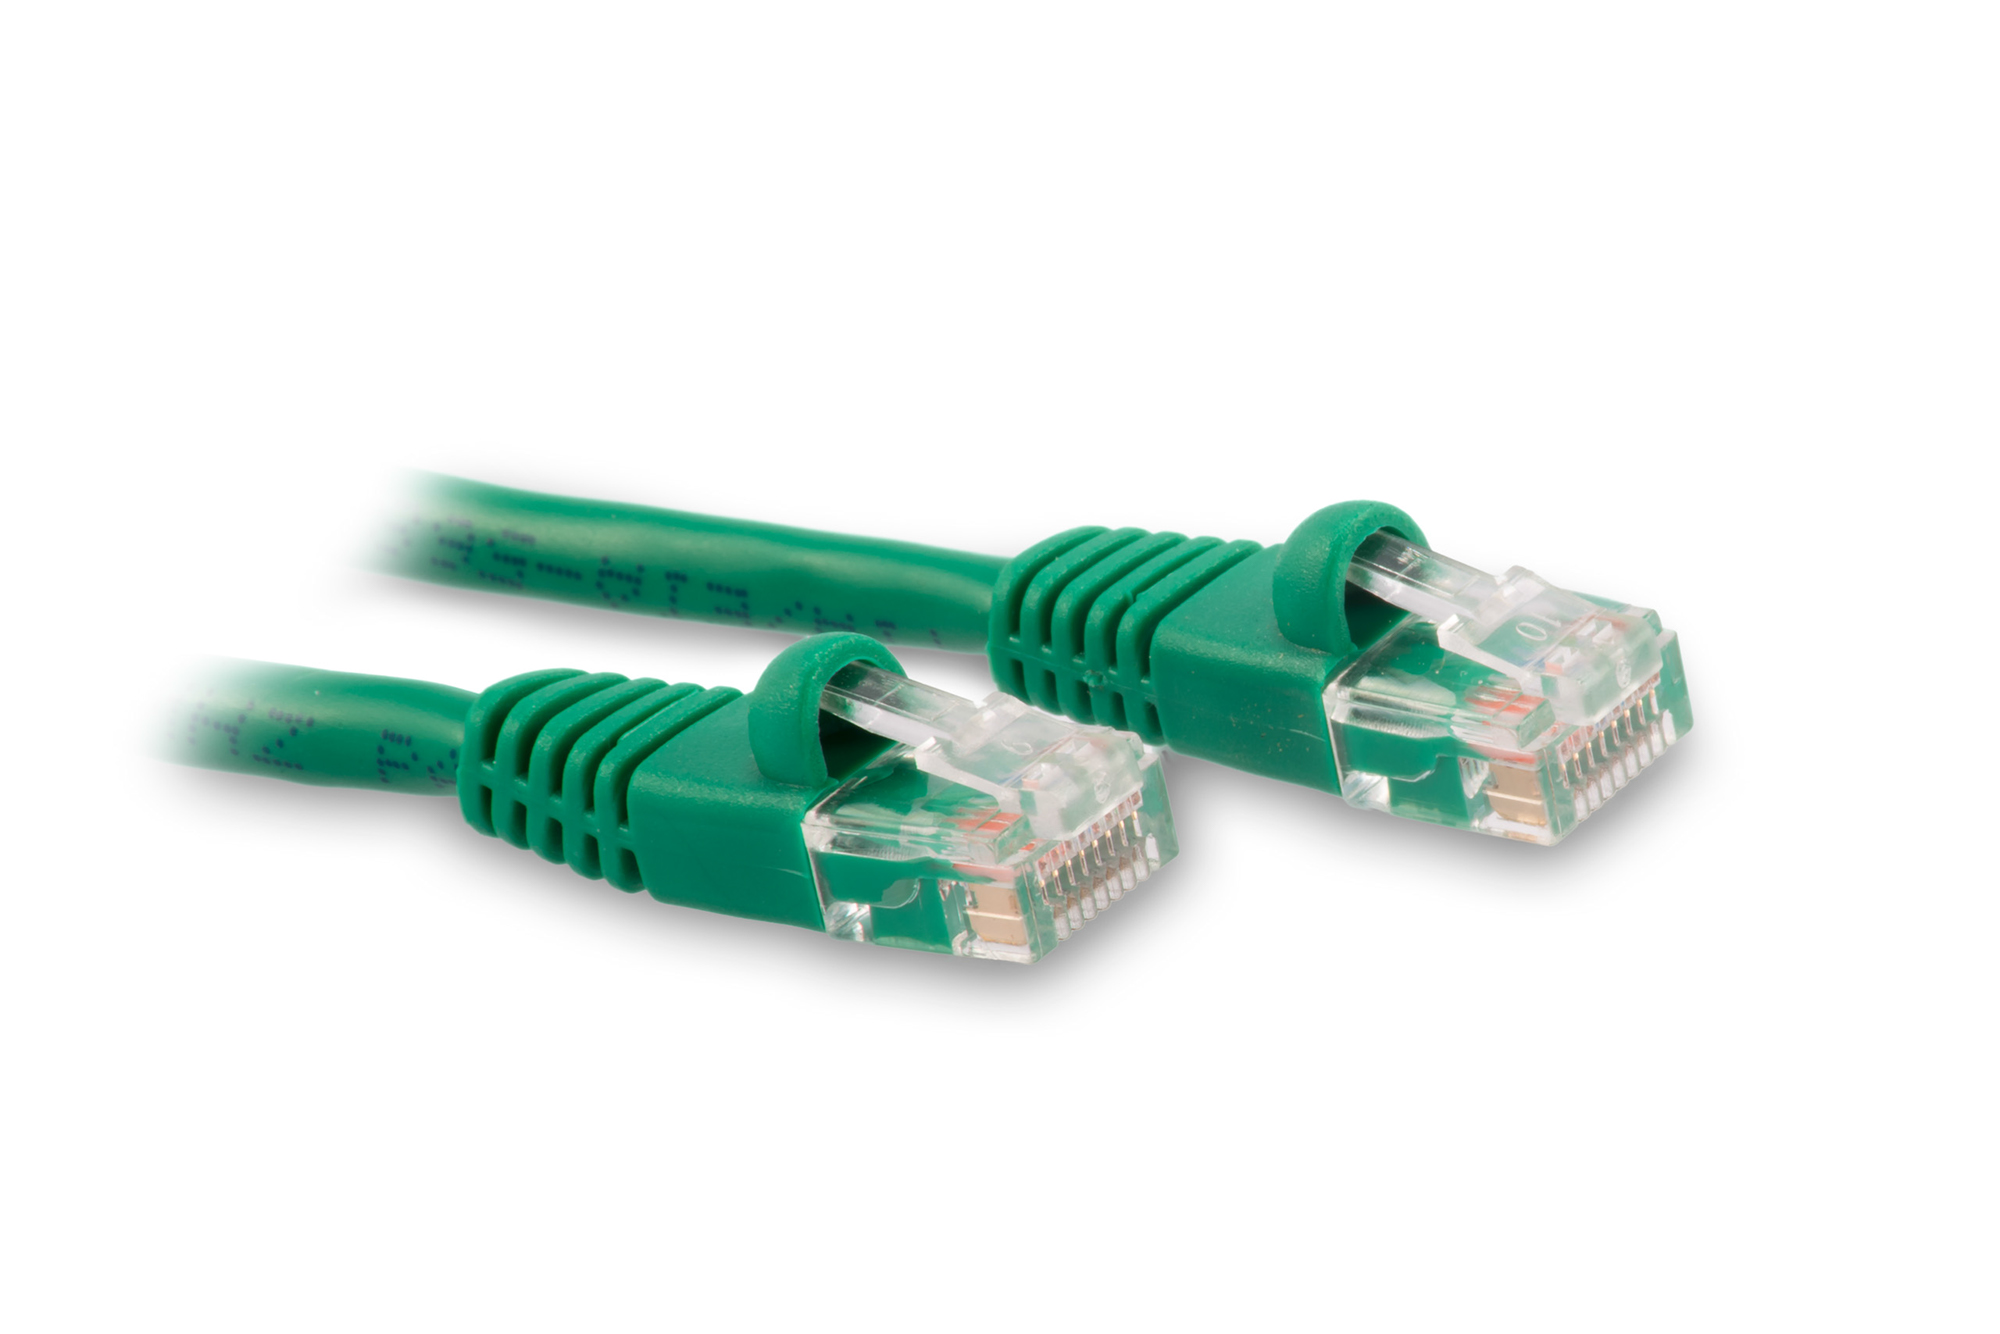 40ft Cat6 Ethernet Patch Cable - Green Color - Snagless Boot